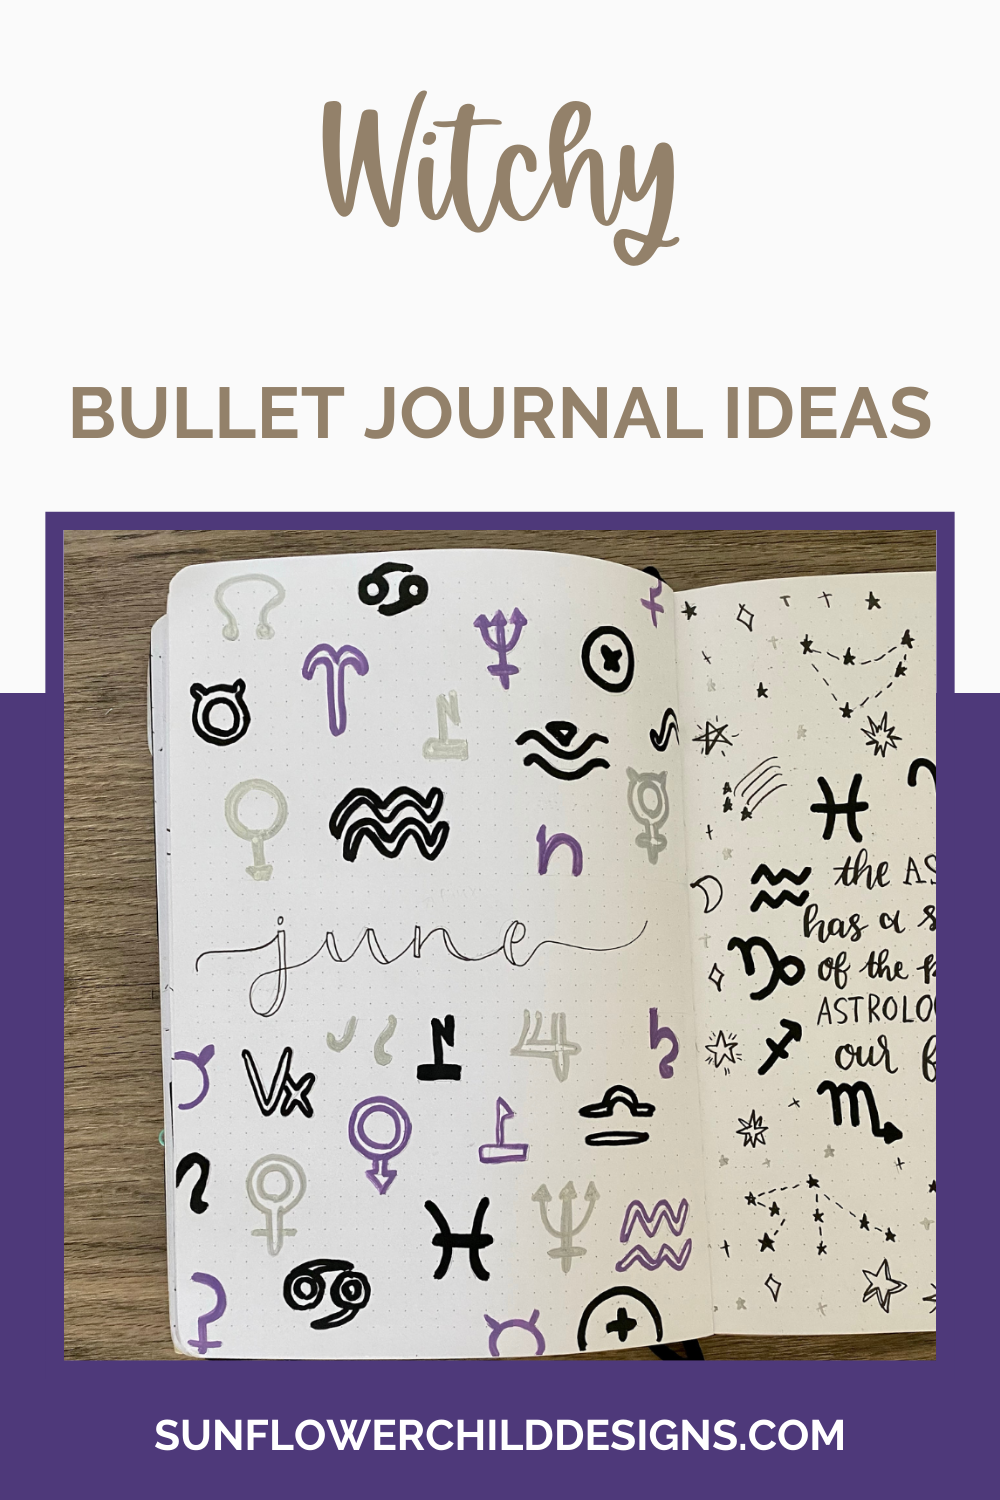 witchy-bullet-journal-ideas-june-bullet-journal-ideas 6.png